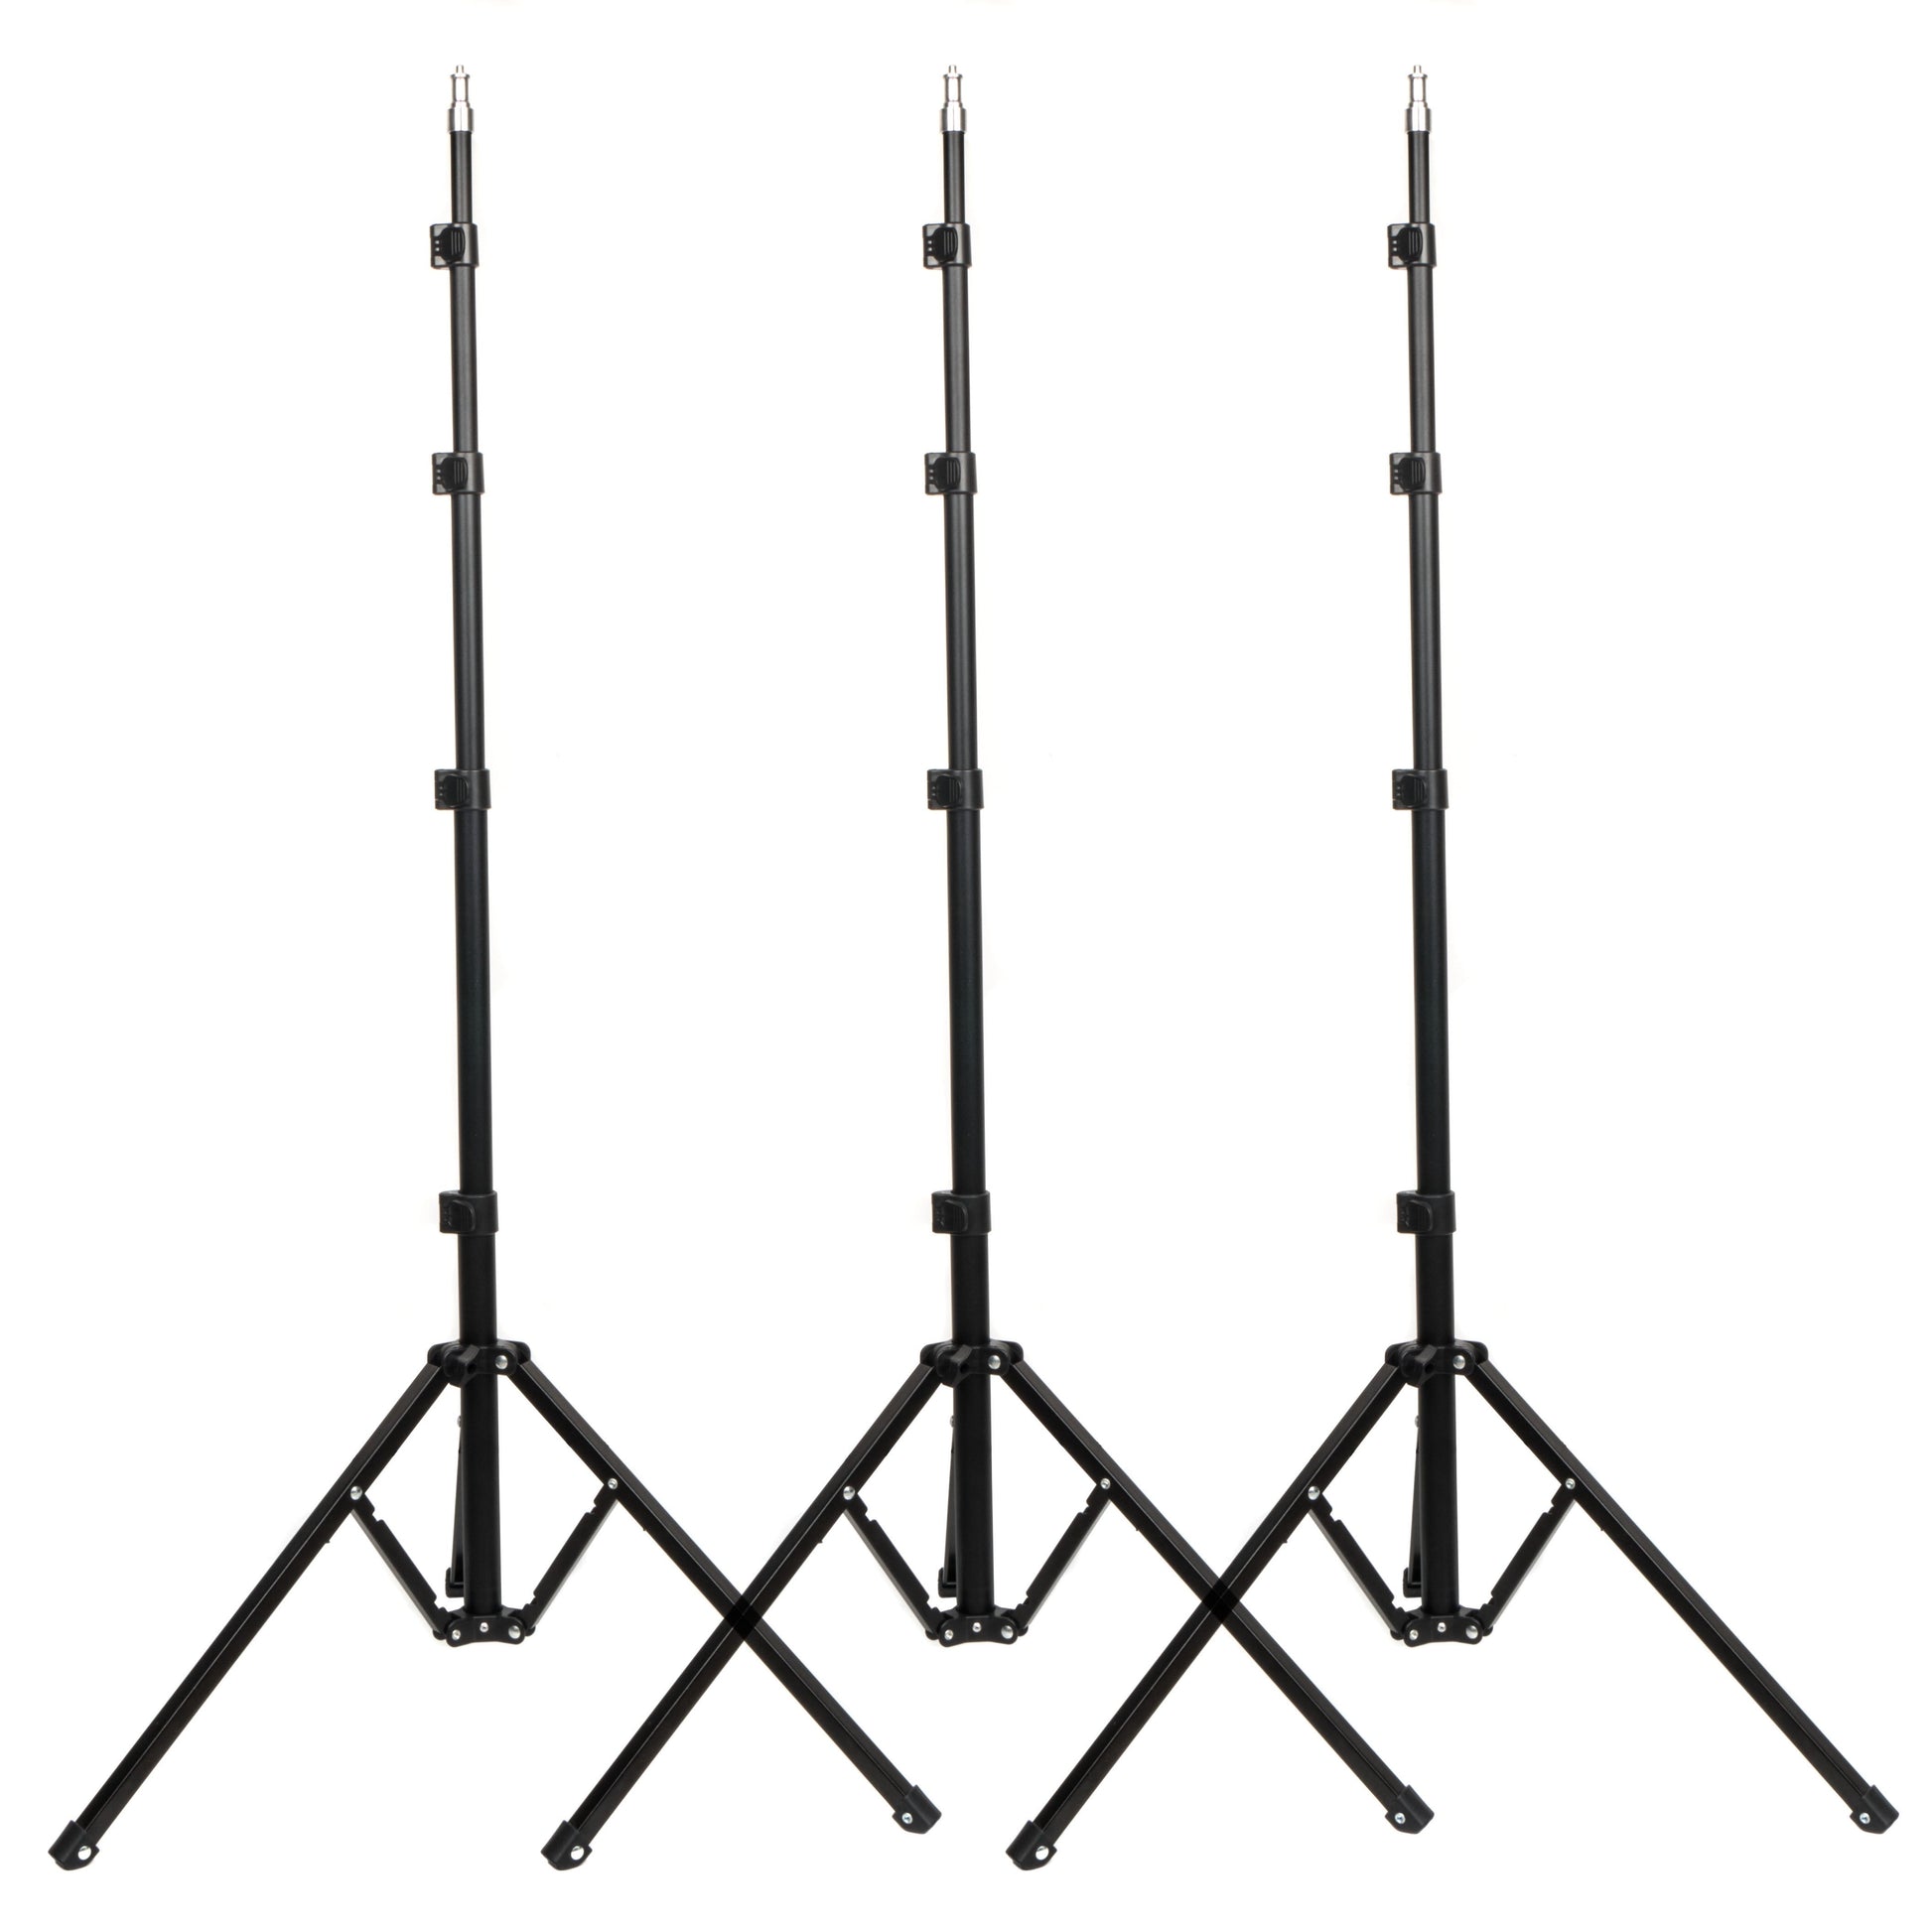 CAME-TV 3X Quick Set Up Compact and Portable Reverse Folding Light Stand for Traveling - CAME-TV